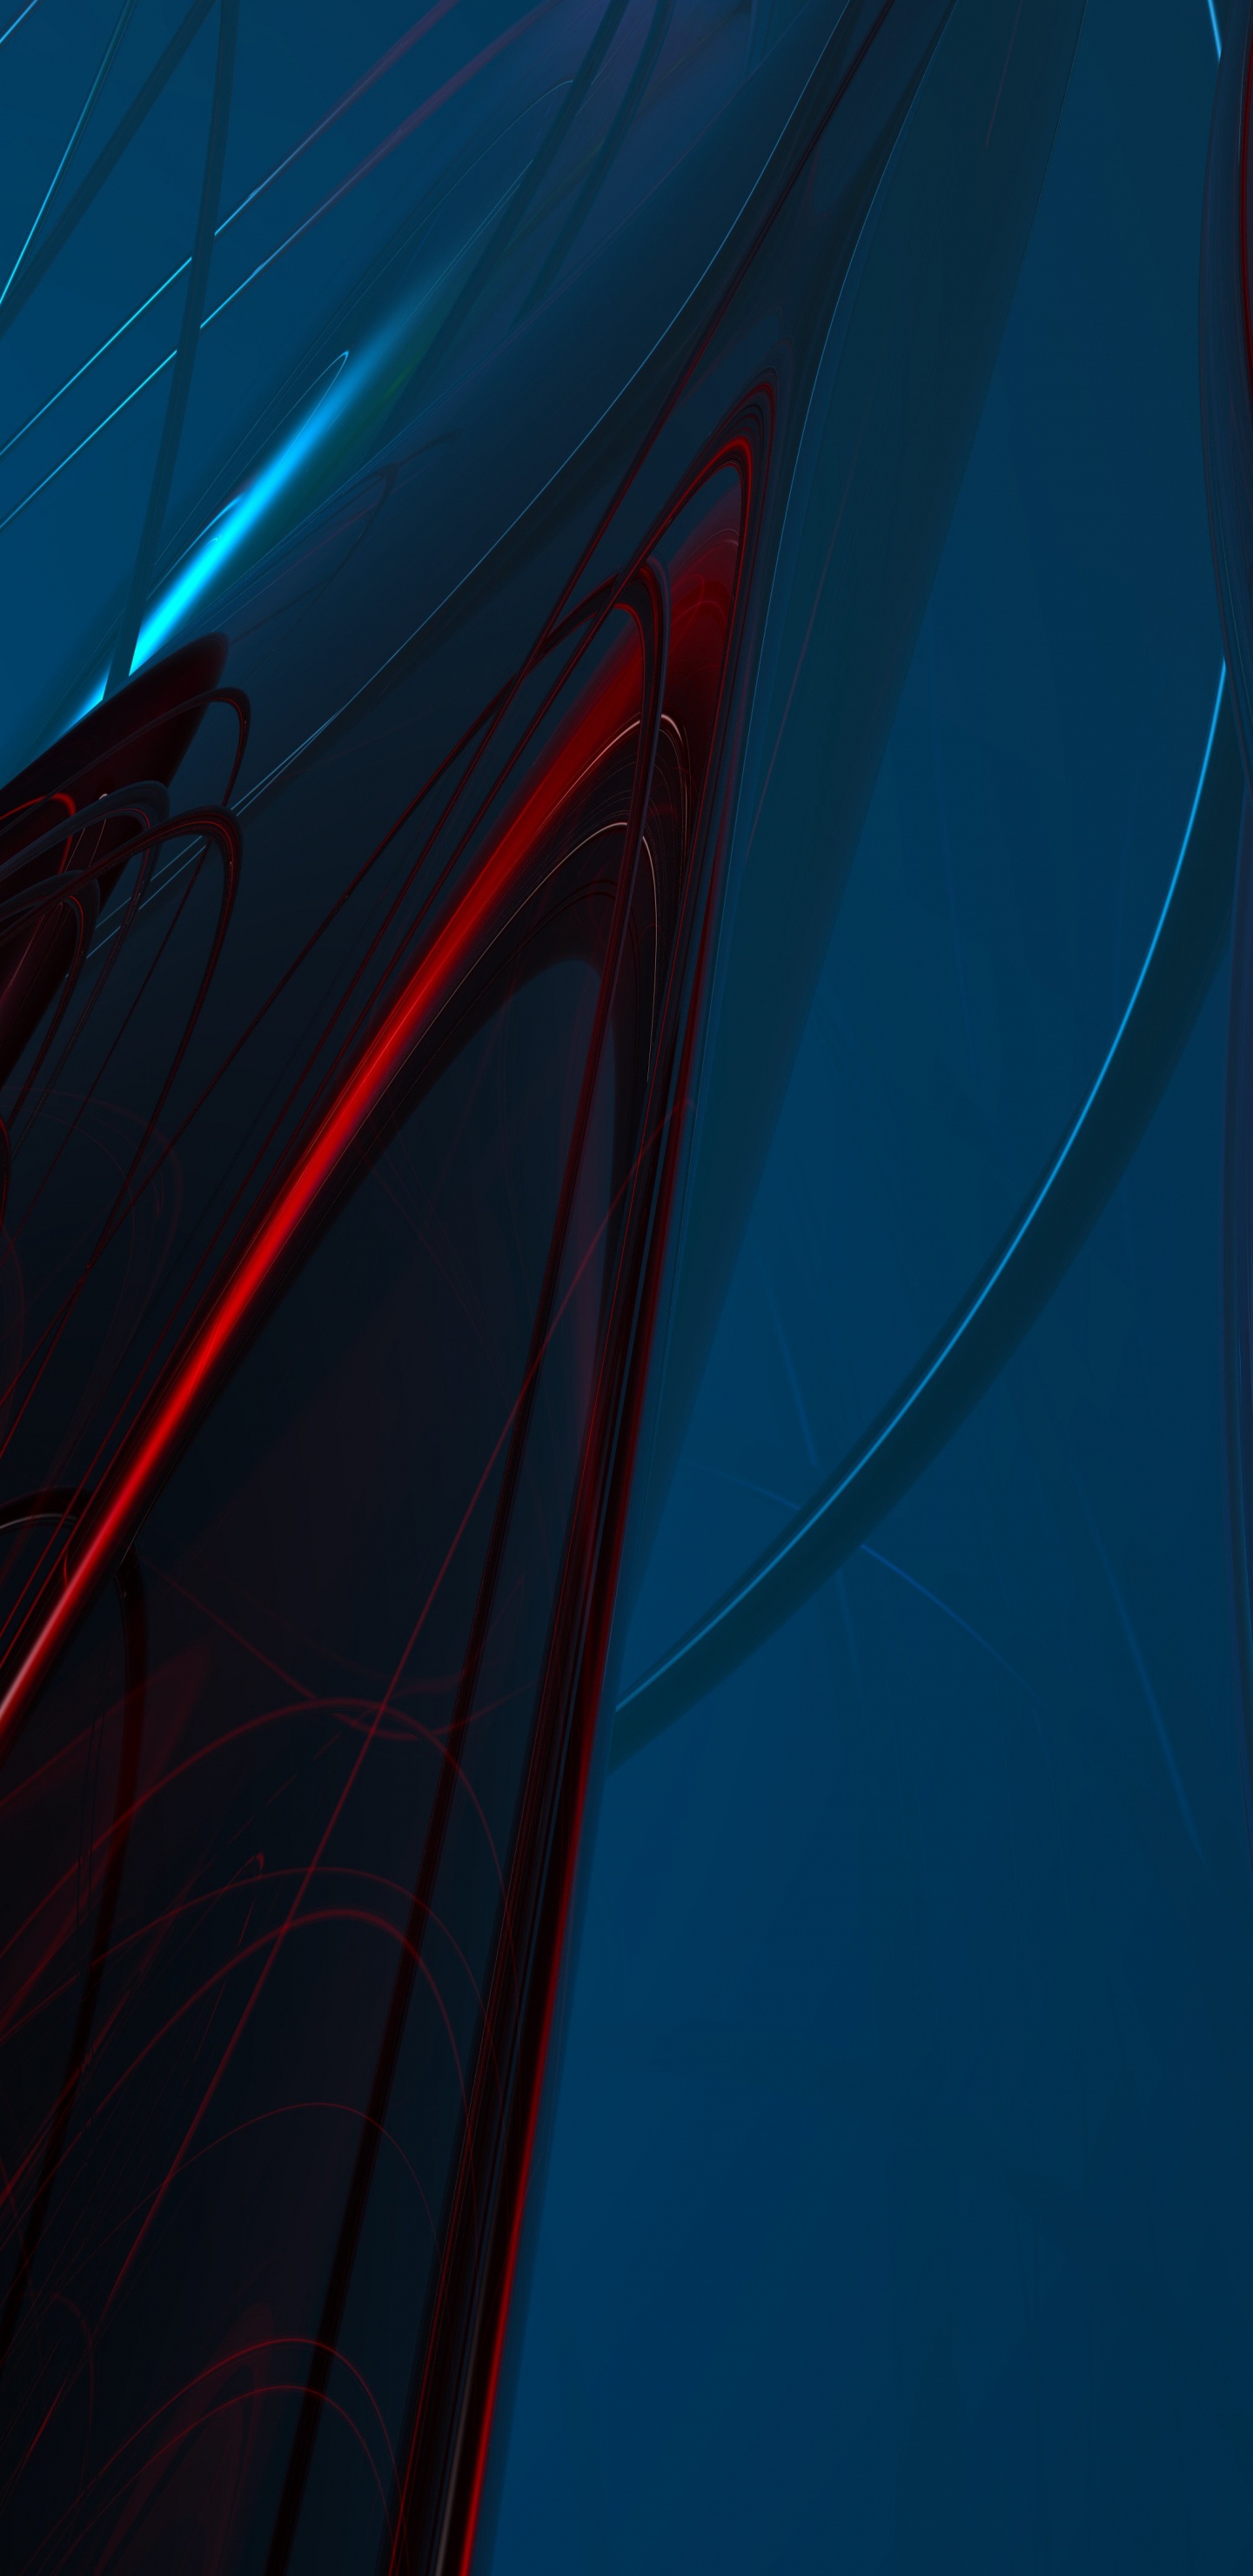 Blue and Red Light Streaks. Wallpaper in 1440x2960 Resolution